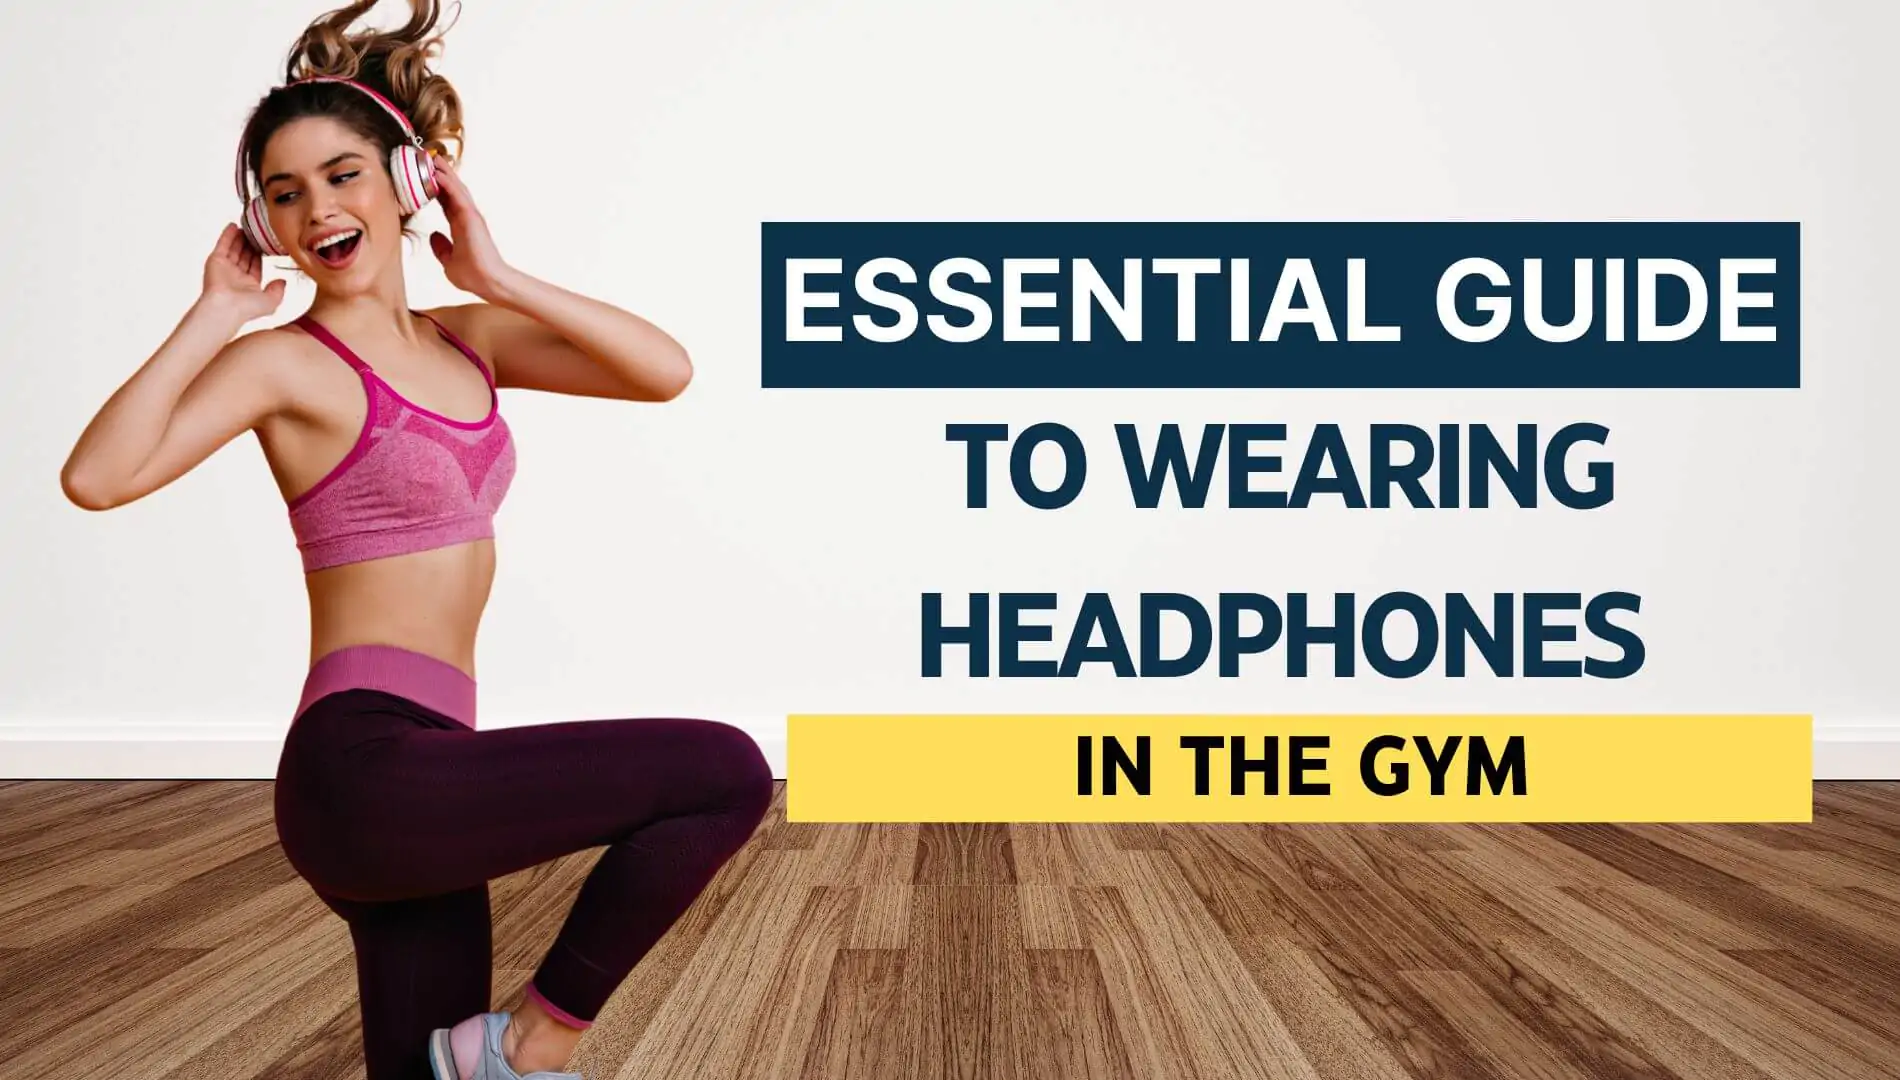 The Essential Guide to Wearing Headphones in the Gym